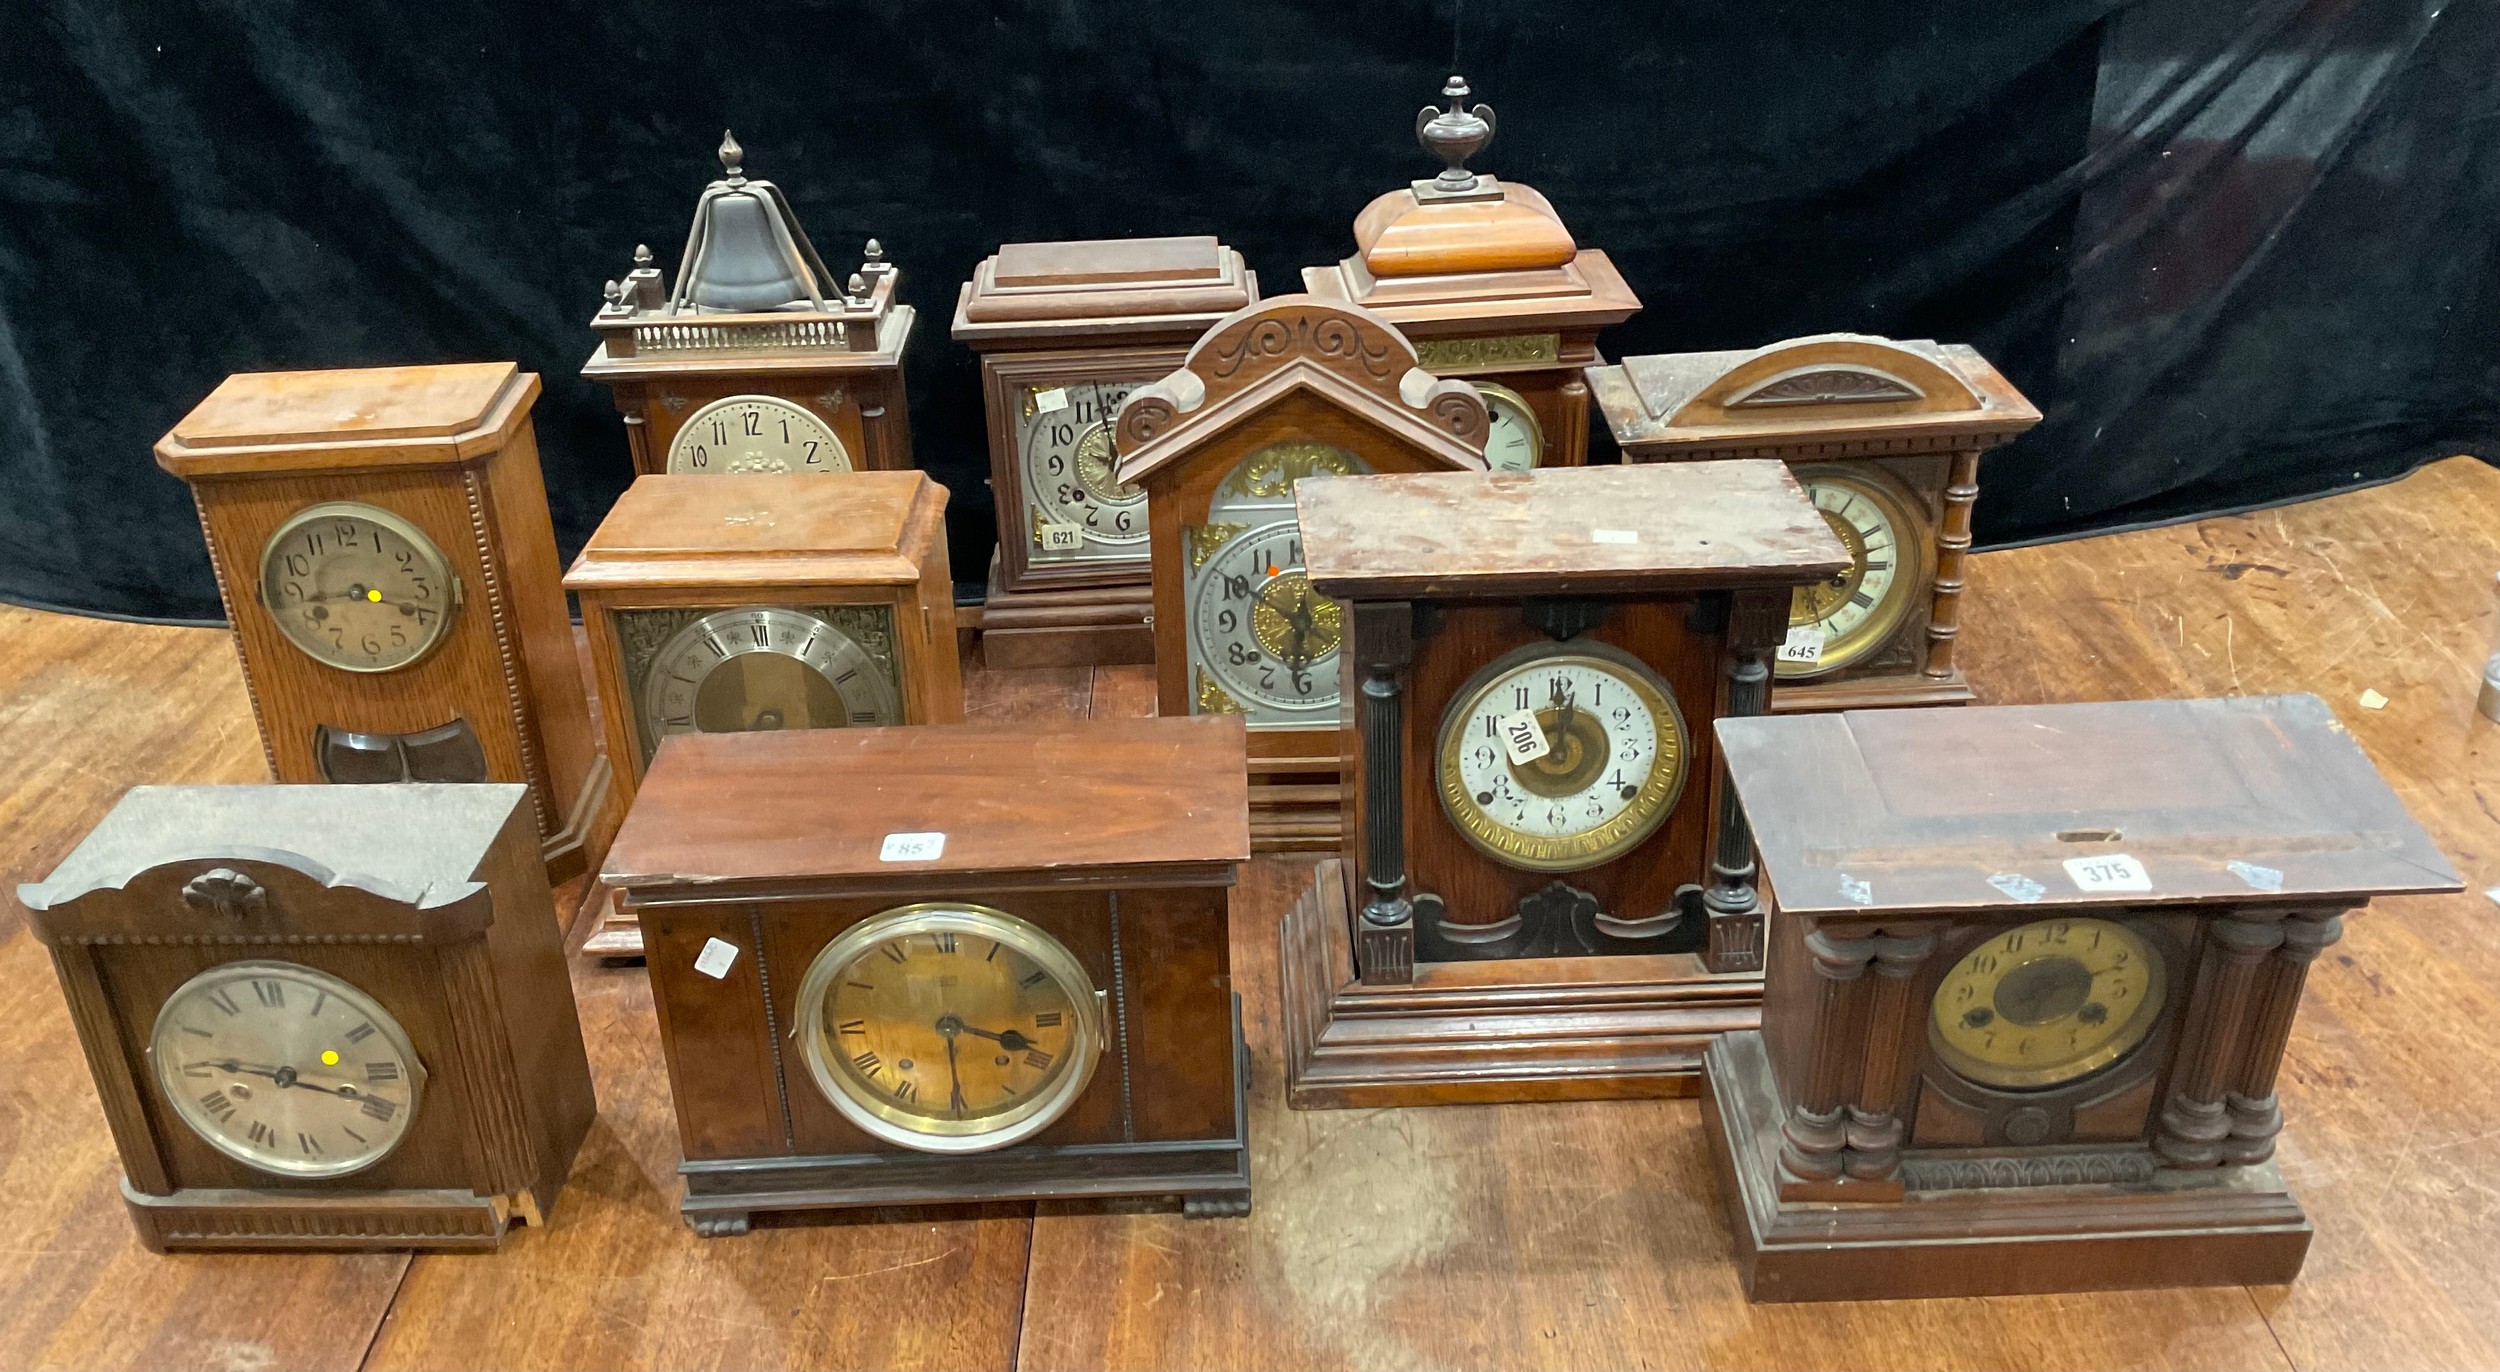 Clocks - early to mid 20th century, architectural cases, mostly oak (11)